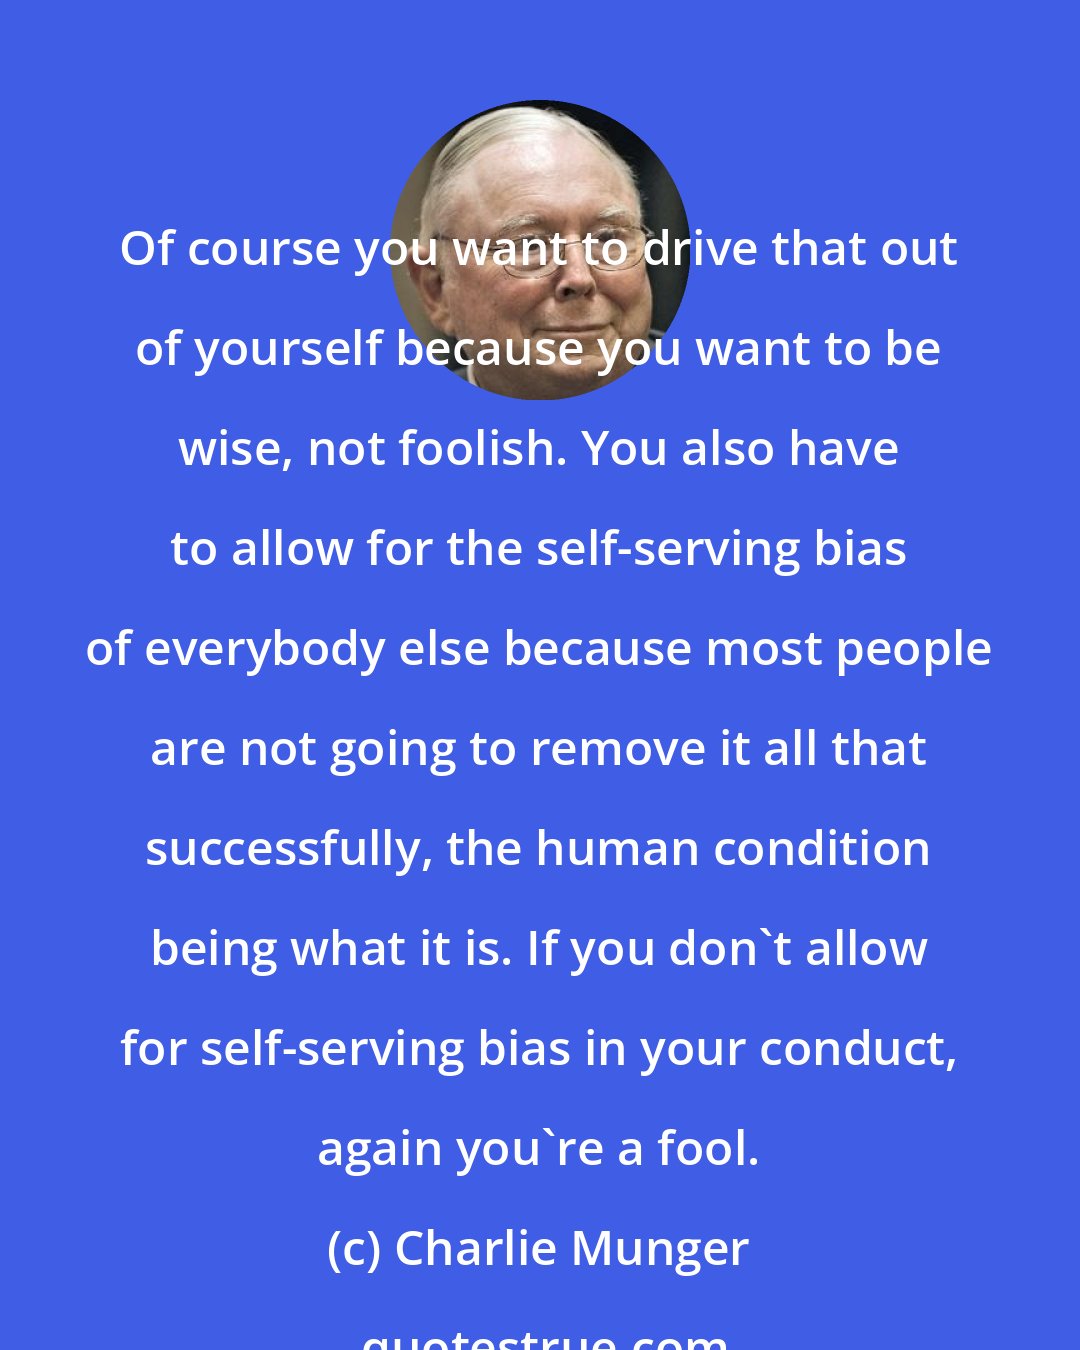 Charlie Munger: Of course you want to drive that out of yourself because you want to be wise, not foolish. You also have to allow for the self-serving bias of everybody else because most people are not going to remove it all that successfully, the human condition being what it is. If you don't allow for self-serving bias in your conduct, again you're a fool.